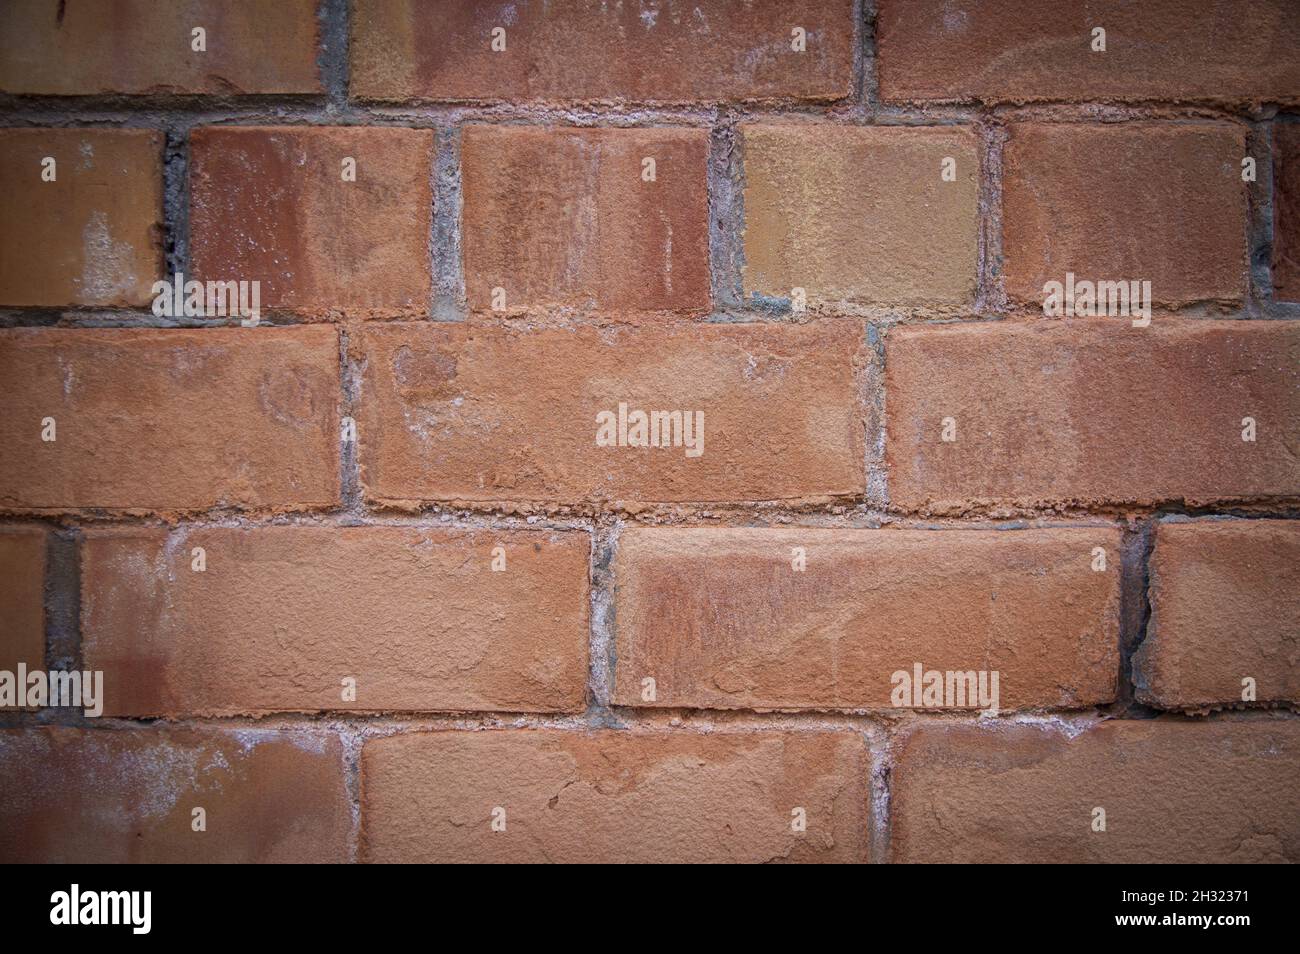 Grey white black red orange old vintage brick wall background. Rustic  cemented dark brick house wall texture with grunge surface. Shabby Building  Facade With Damaged Plaster. Aged weathered exterior Stock Photo -